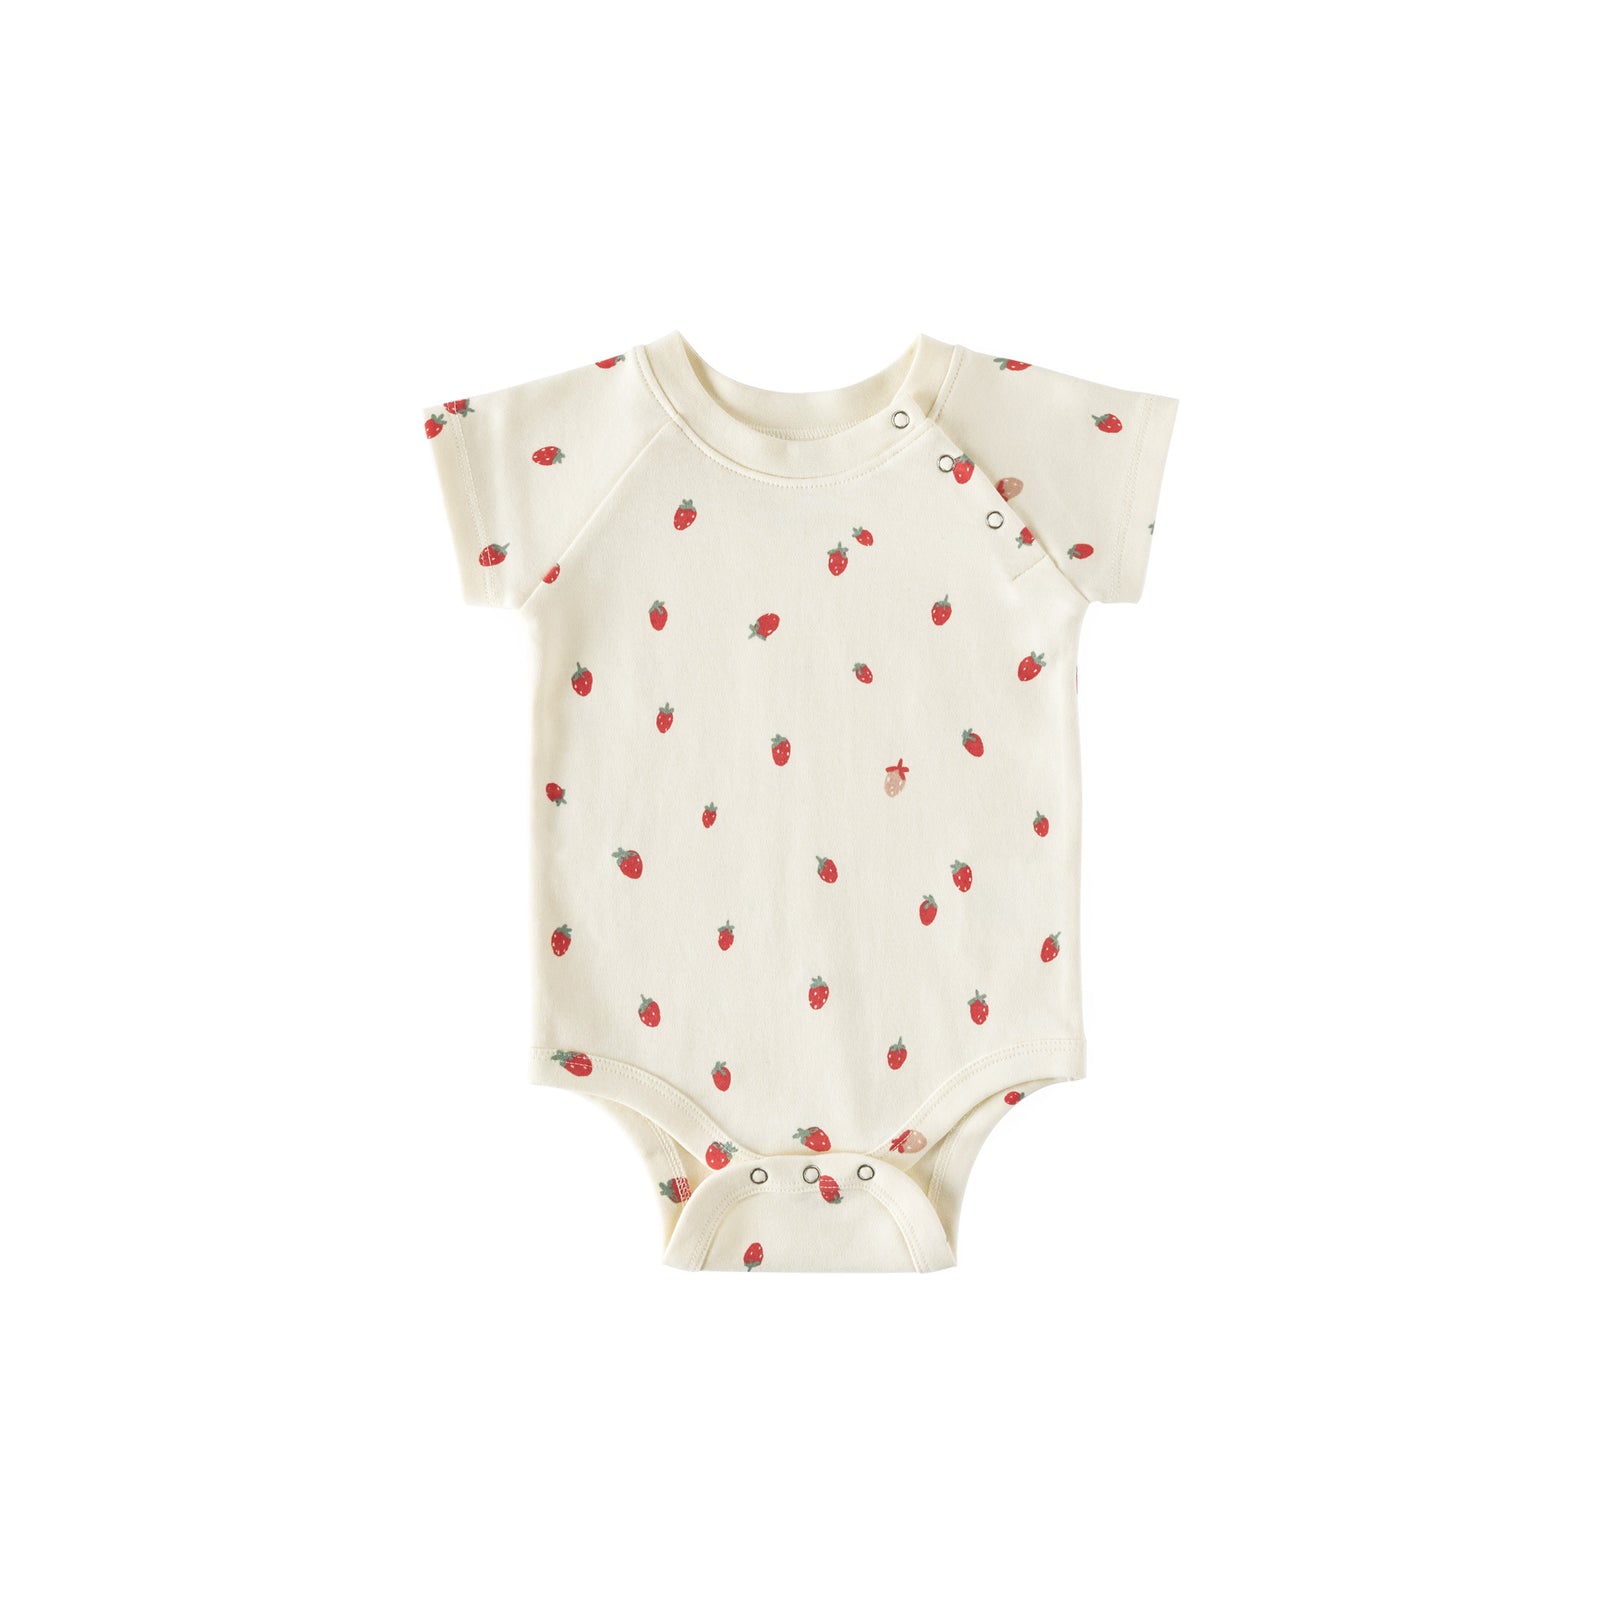 Snap One-Piece One-Piece Pehr Strawberry Patch 0 - 3 mos. 